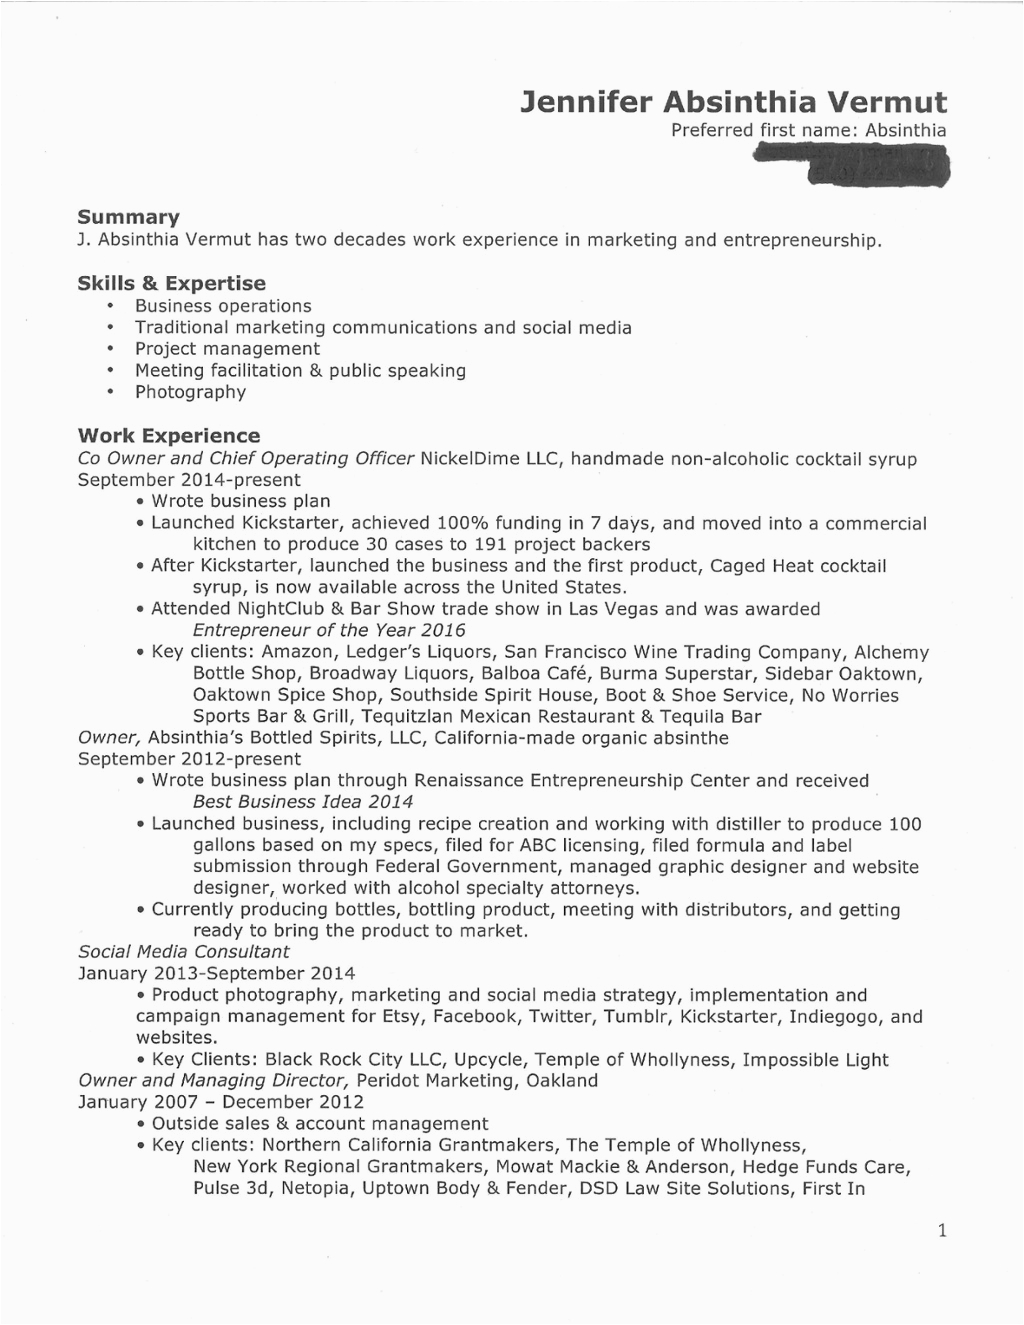 Sample Resume for Mba College Admission Learn From An Accepted Mba Applicant S Resume